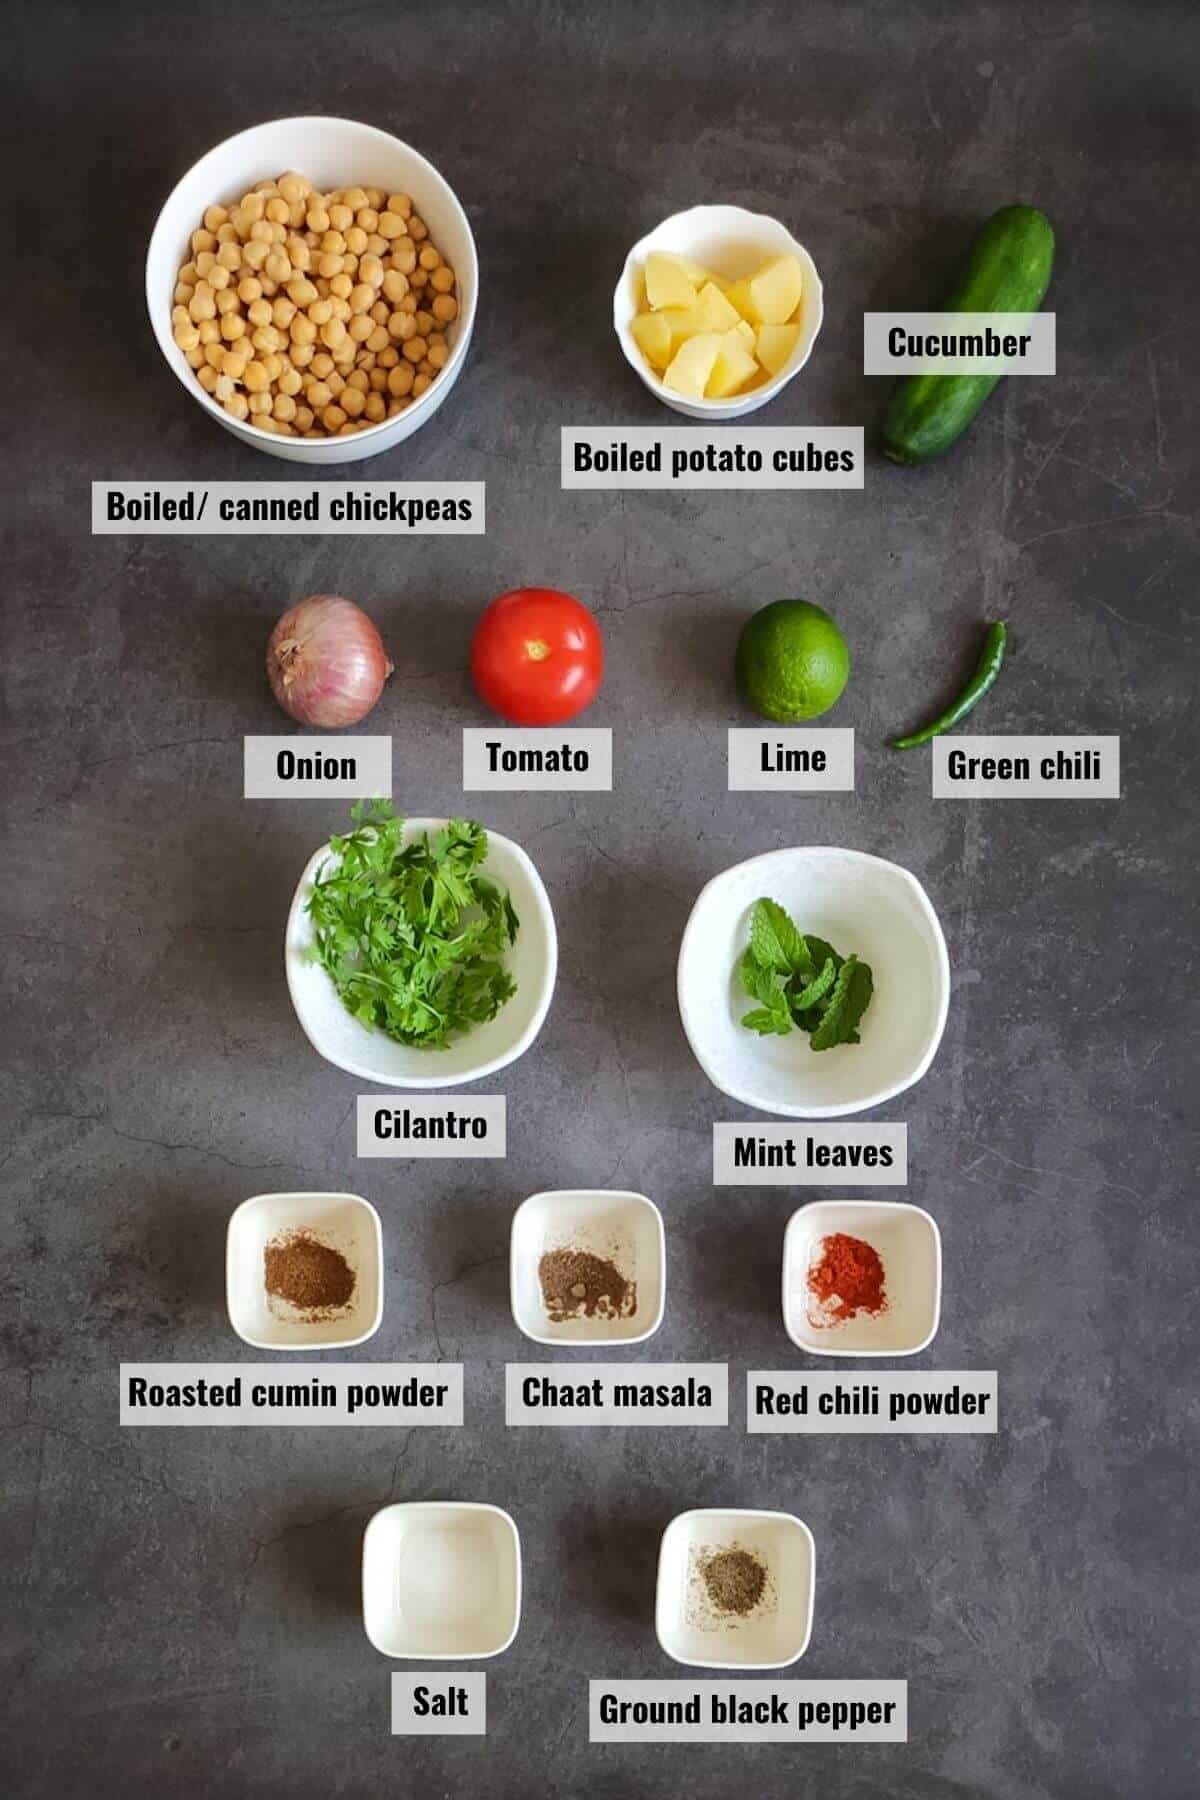 Ingredients required to make Indian Chickpea Salad